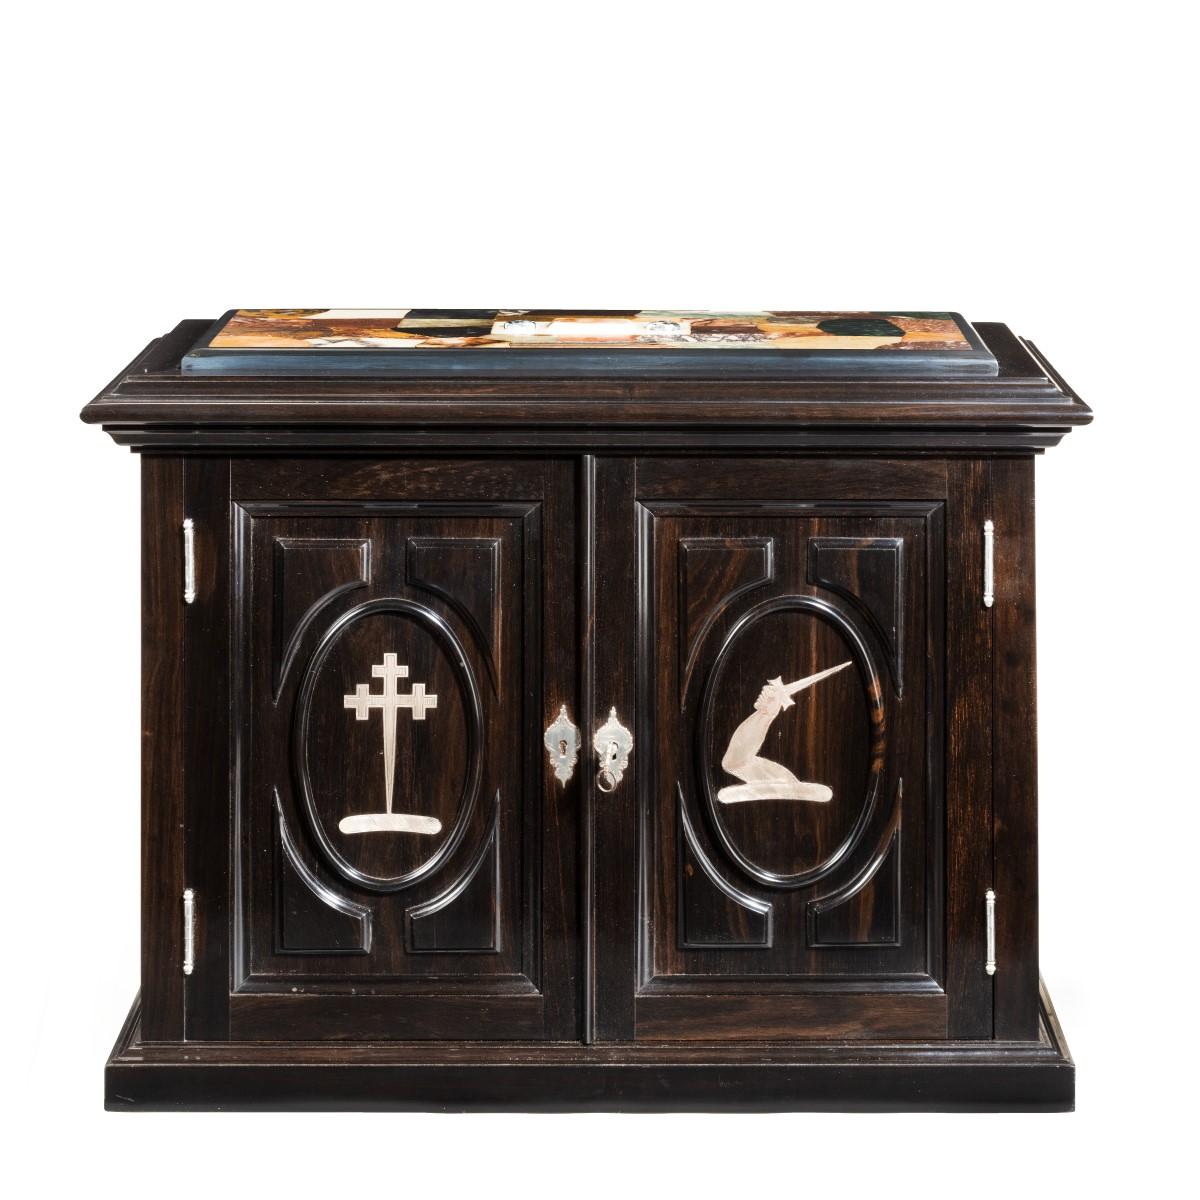 A superb early Victorian ebony collector’s cabinet, of rectangular form with two cupboard doors opening to reveal four short and two long drawers lined in the original silk velvet, the top inset with a pietra dura panel of British hardstones and